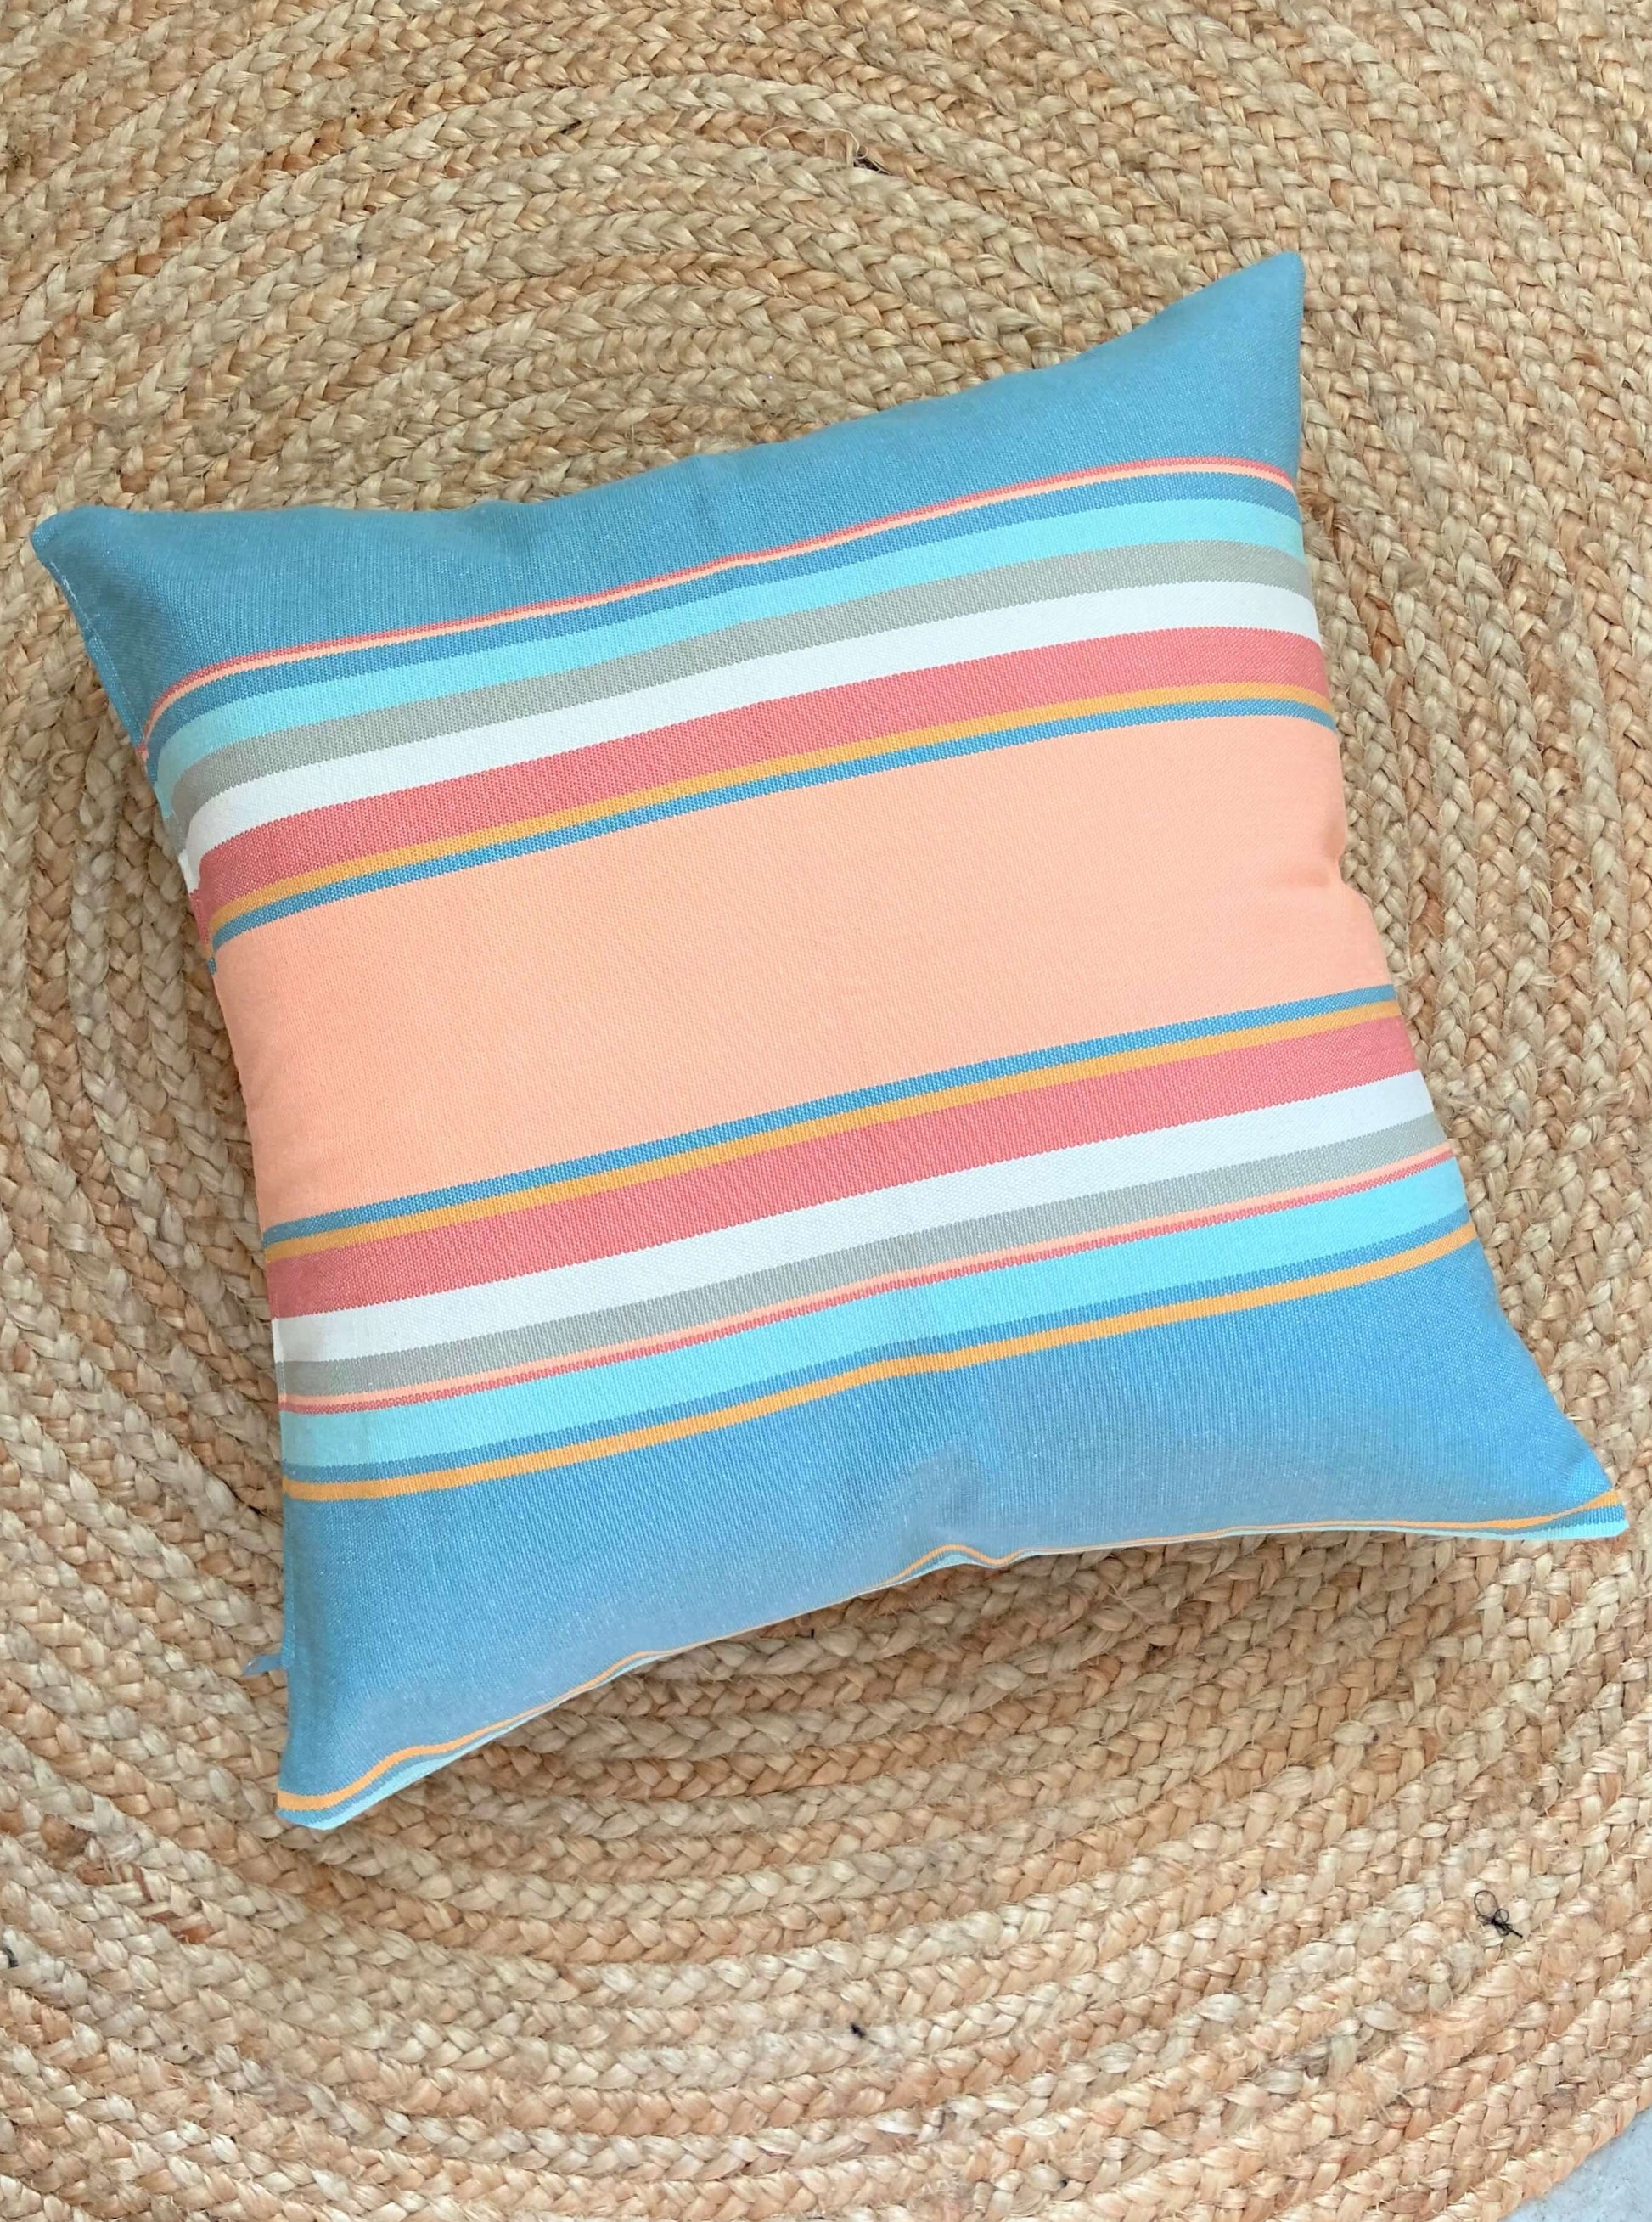 pastel striped pink pillow laying on a jute rug